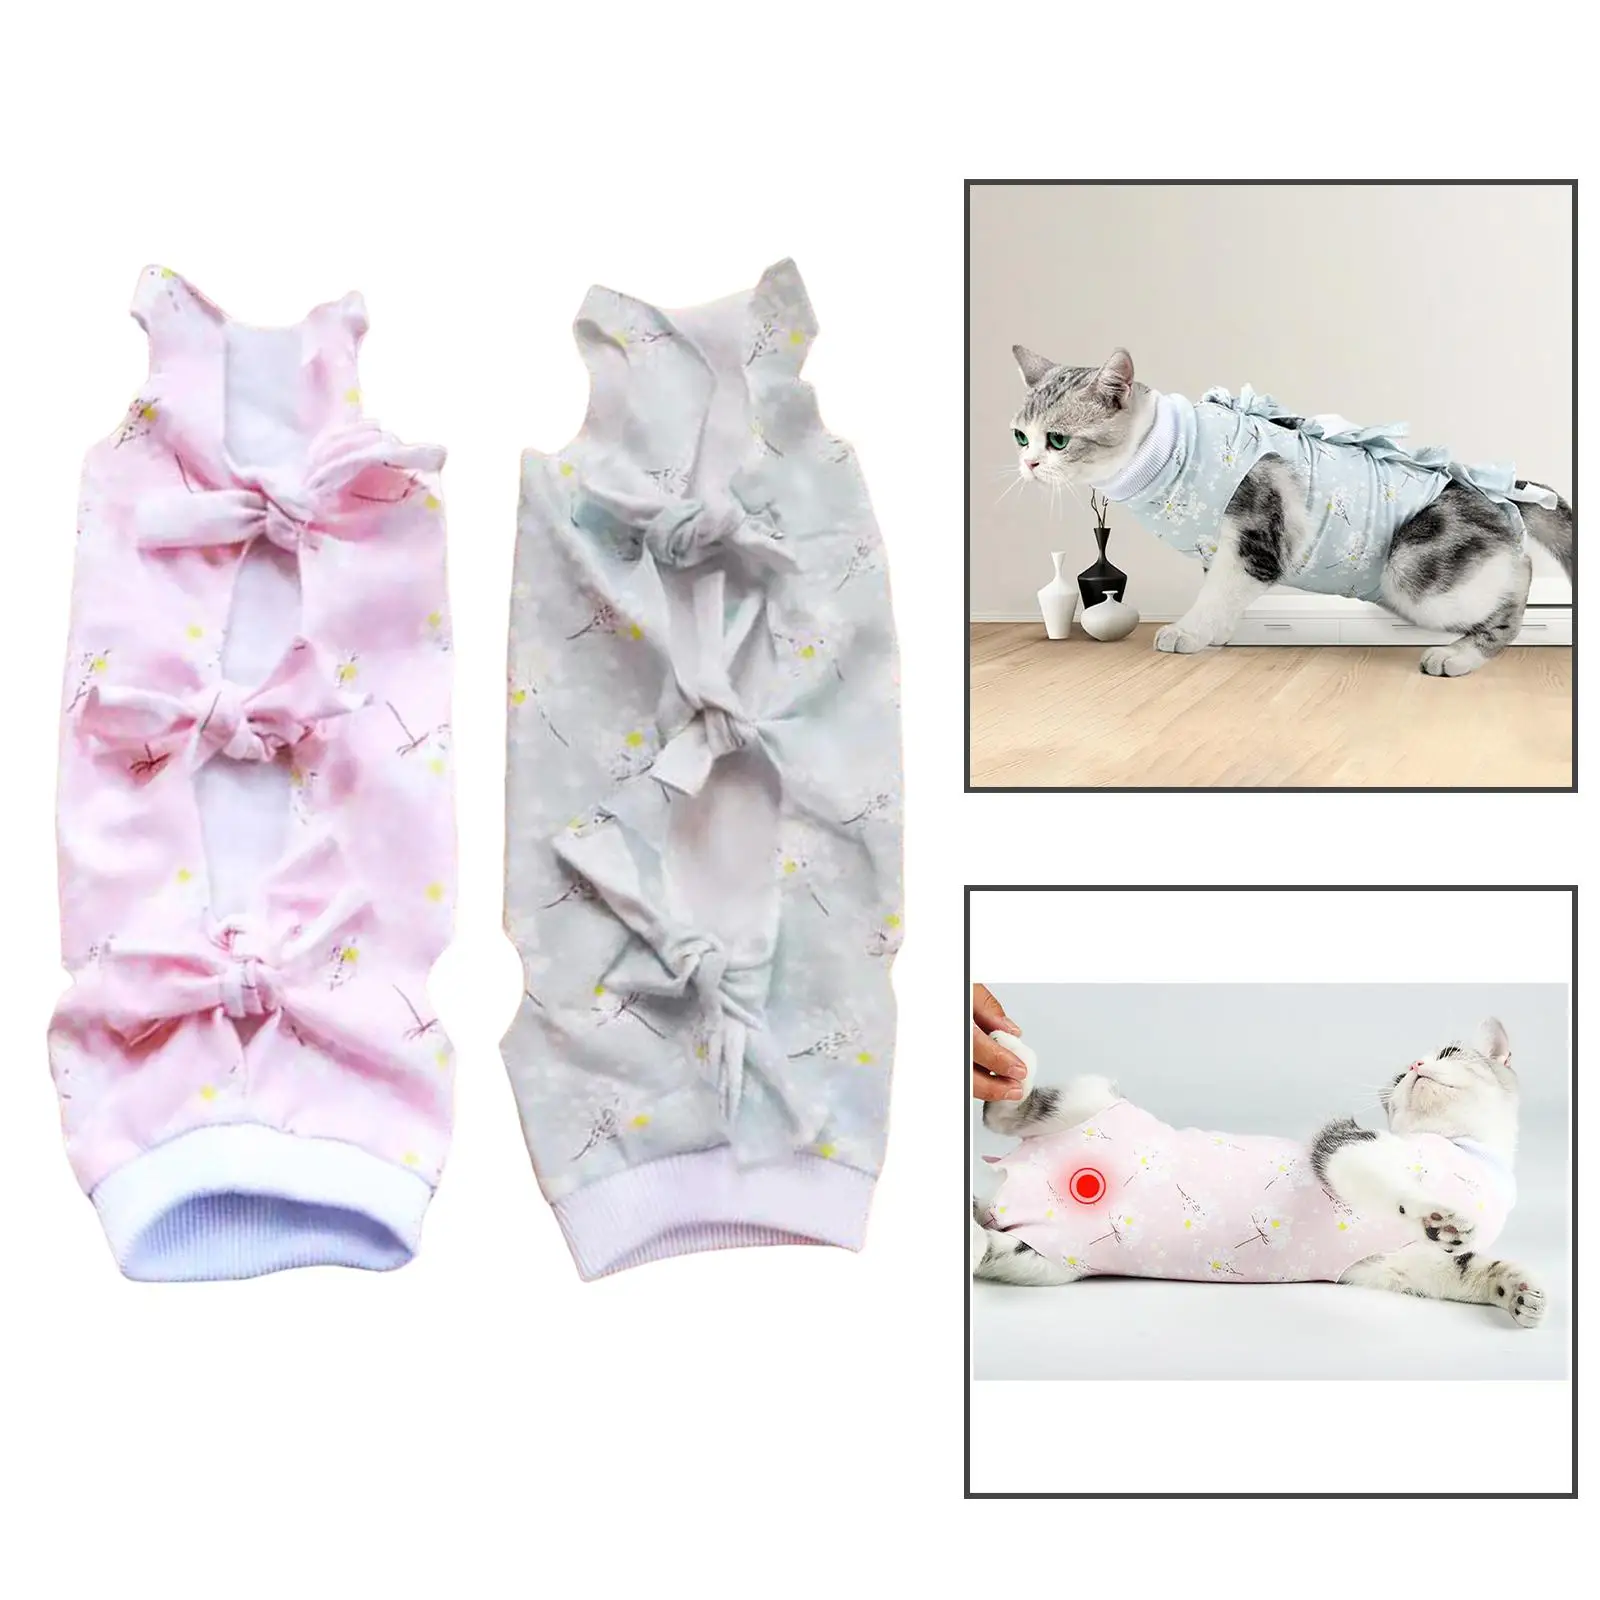 Cat Recovery Suit Clothes Anti Leak Protection wearing Pants Vest Pajama Breathable for Puppy Indoor Home Cats Kittens